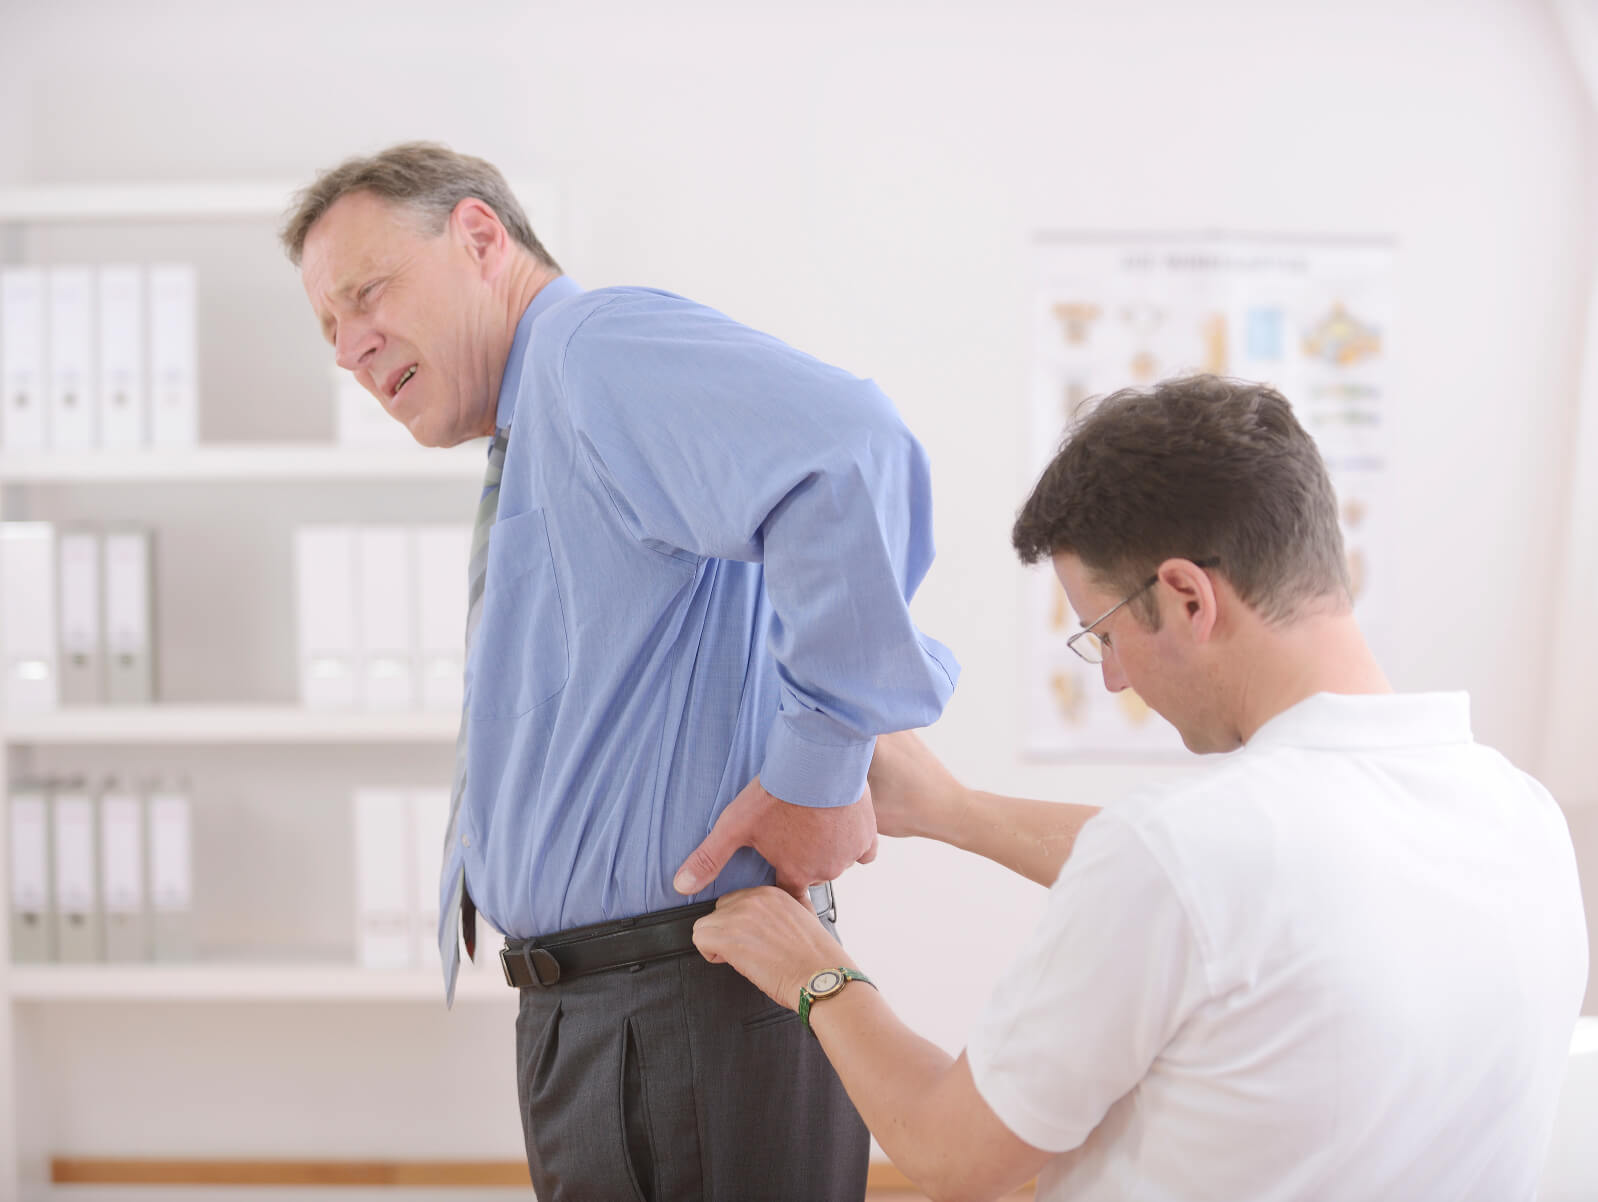 back pain treatment from your chiropractor in topeka